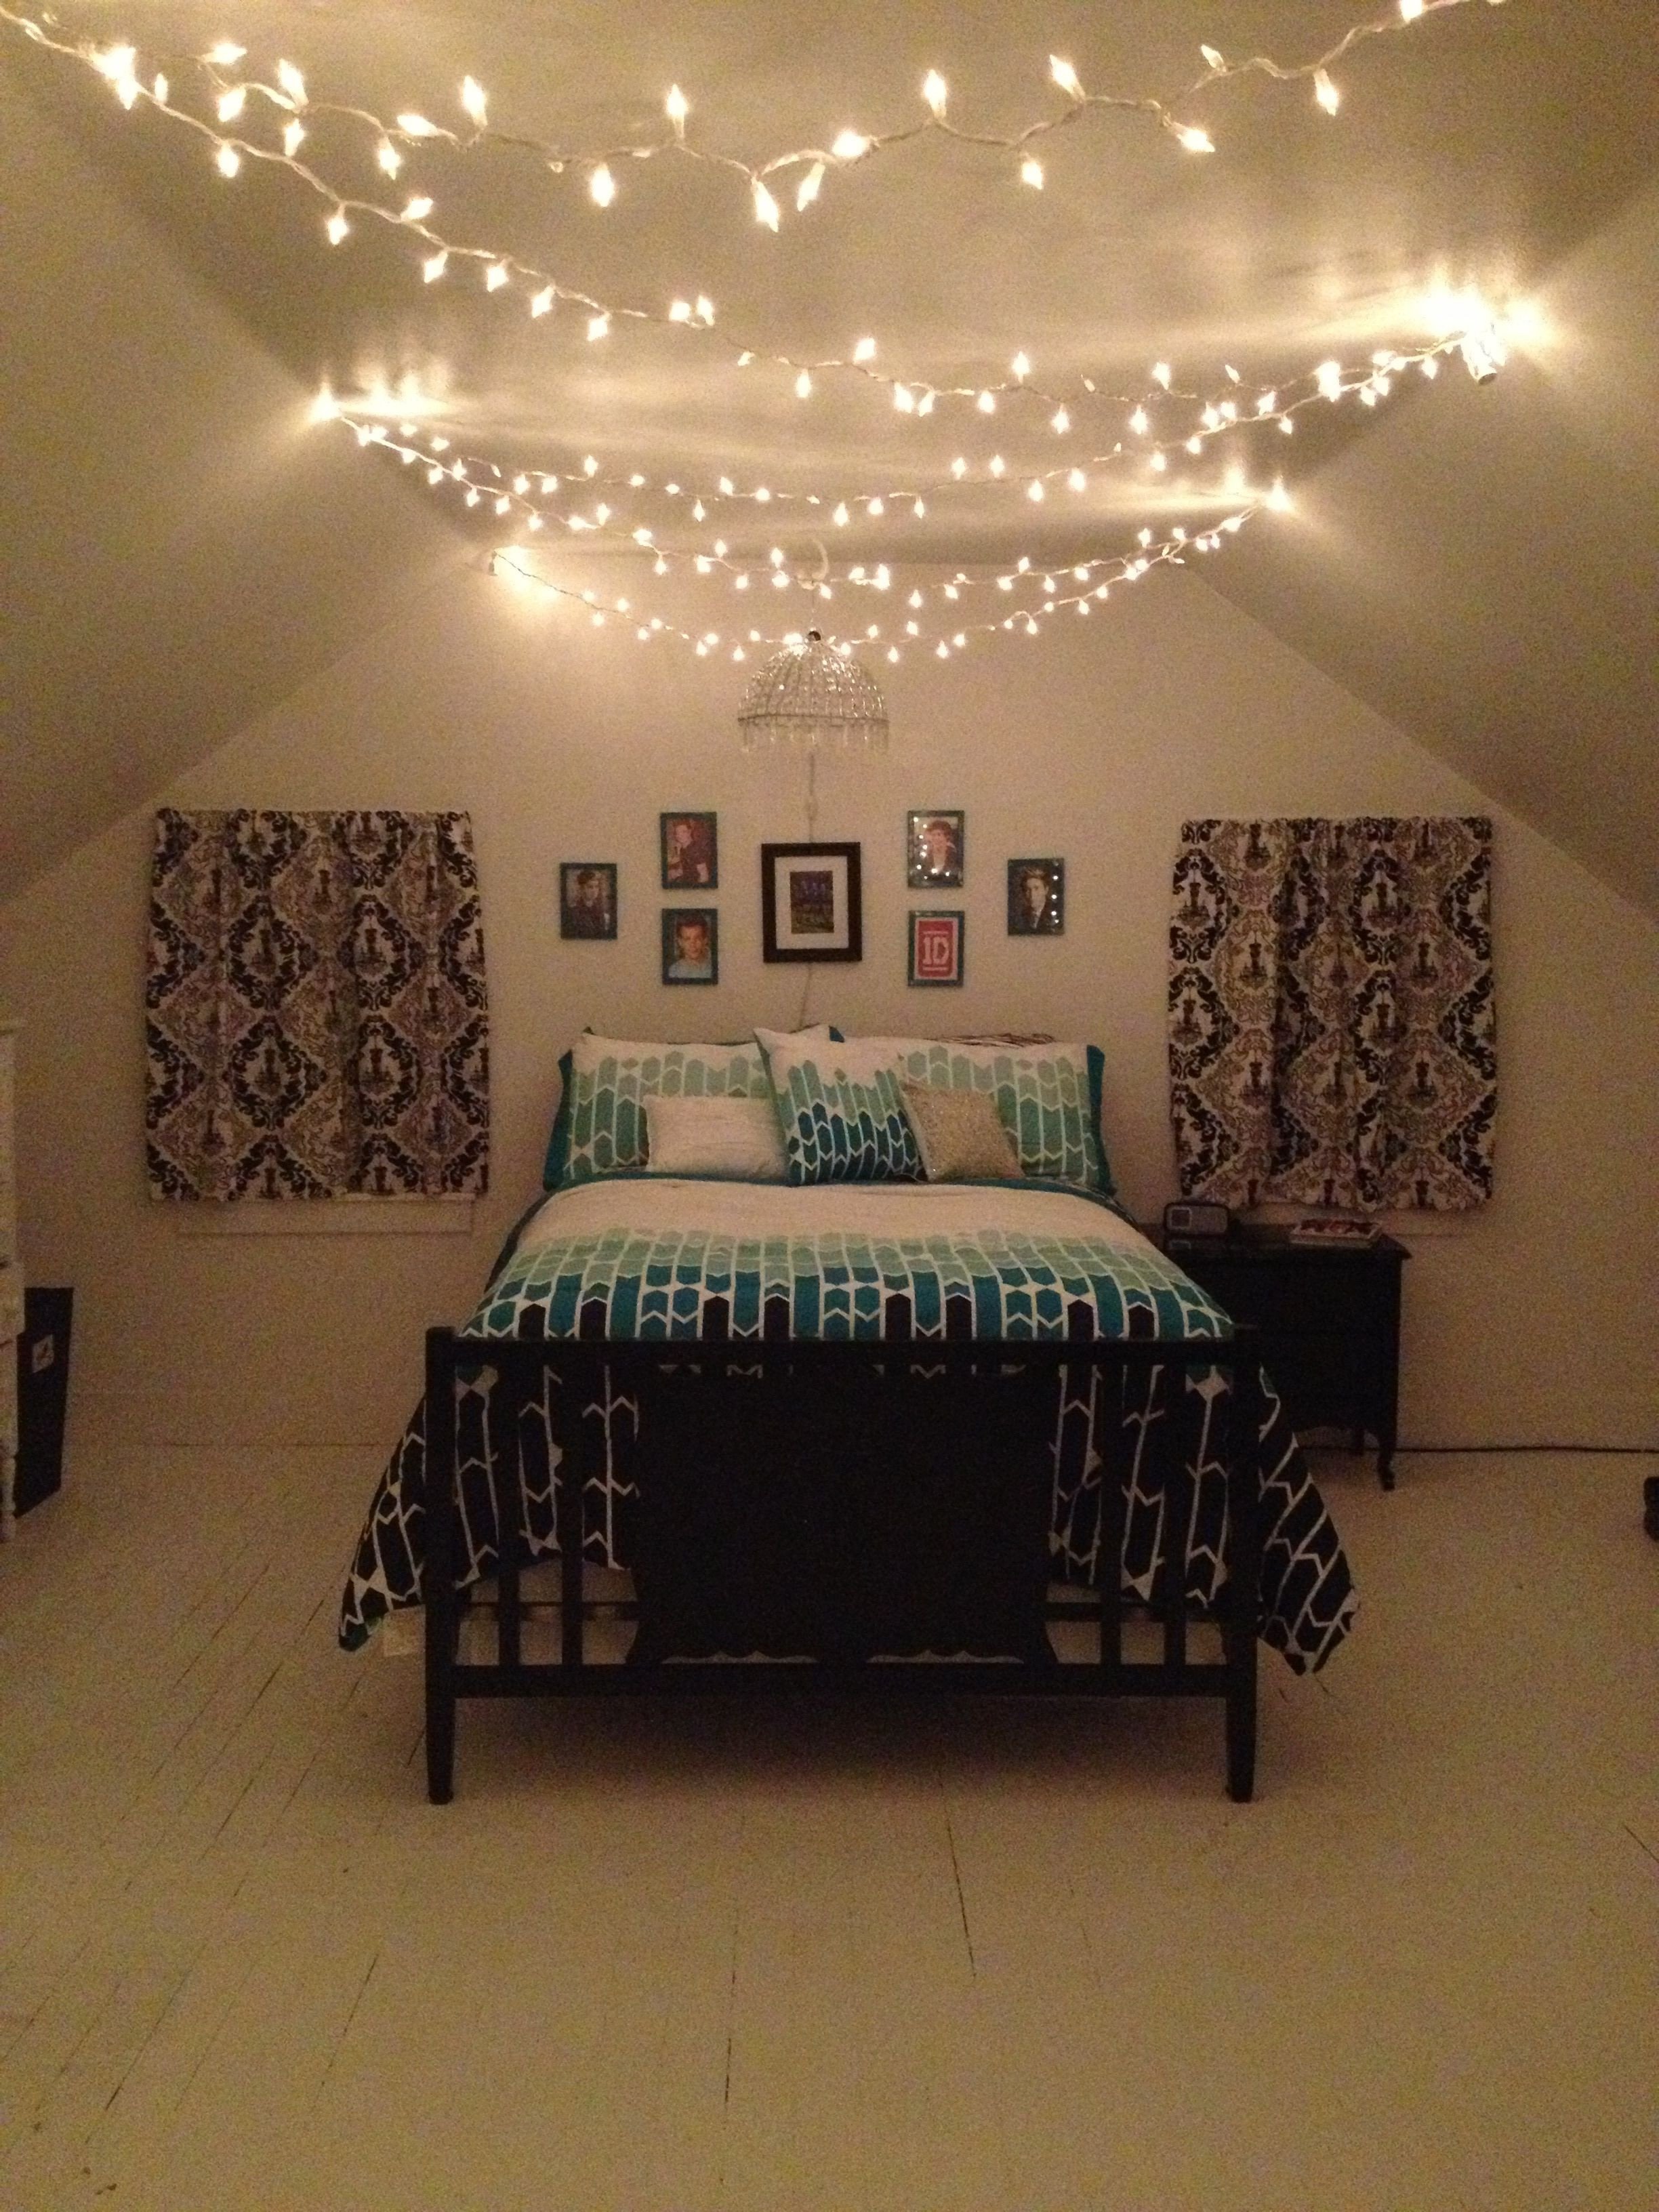 Teal and Black Bedroom Ideas Awesome Pin On Marley S Room Ideas